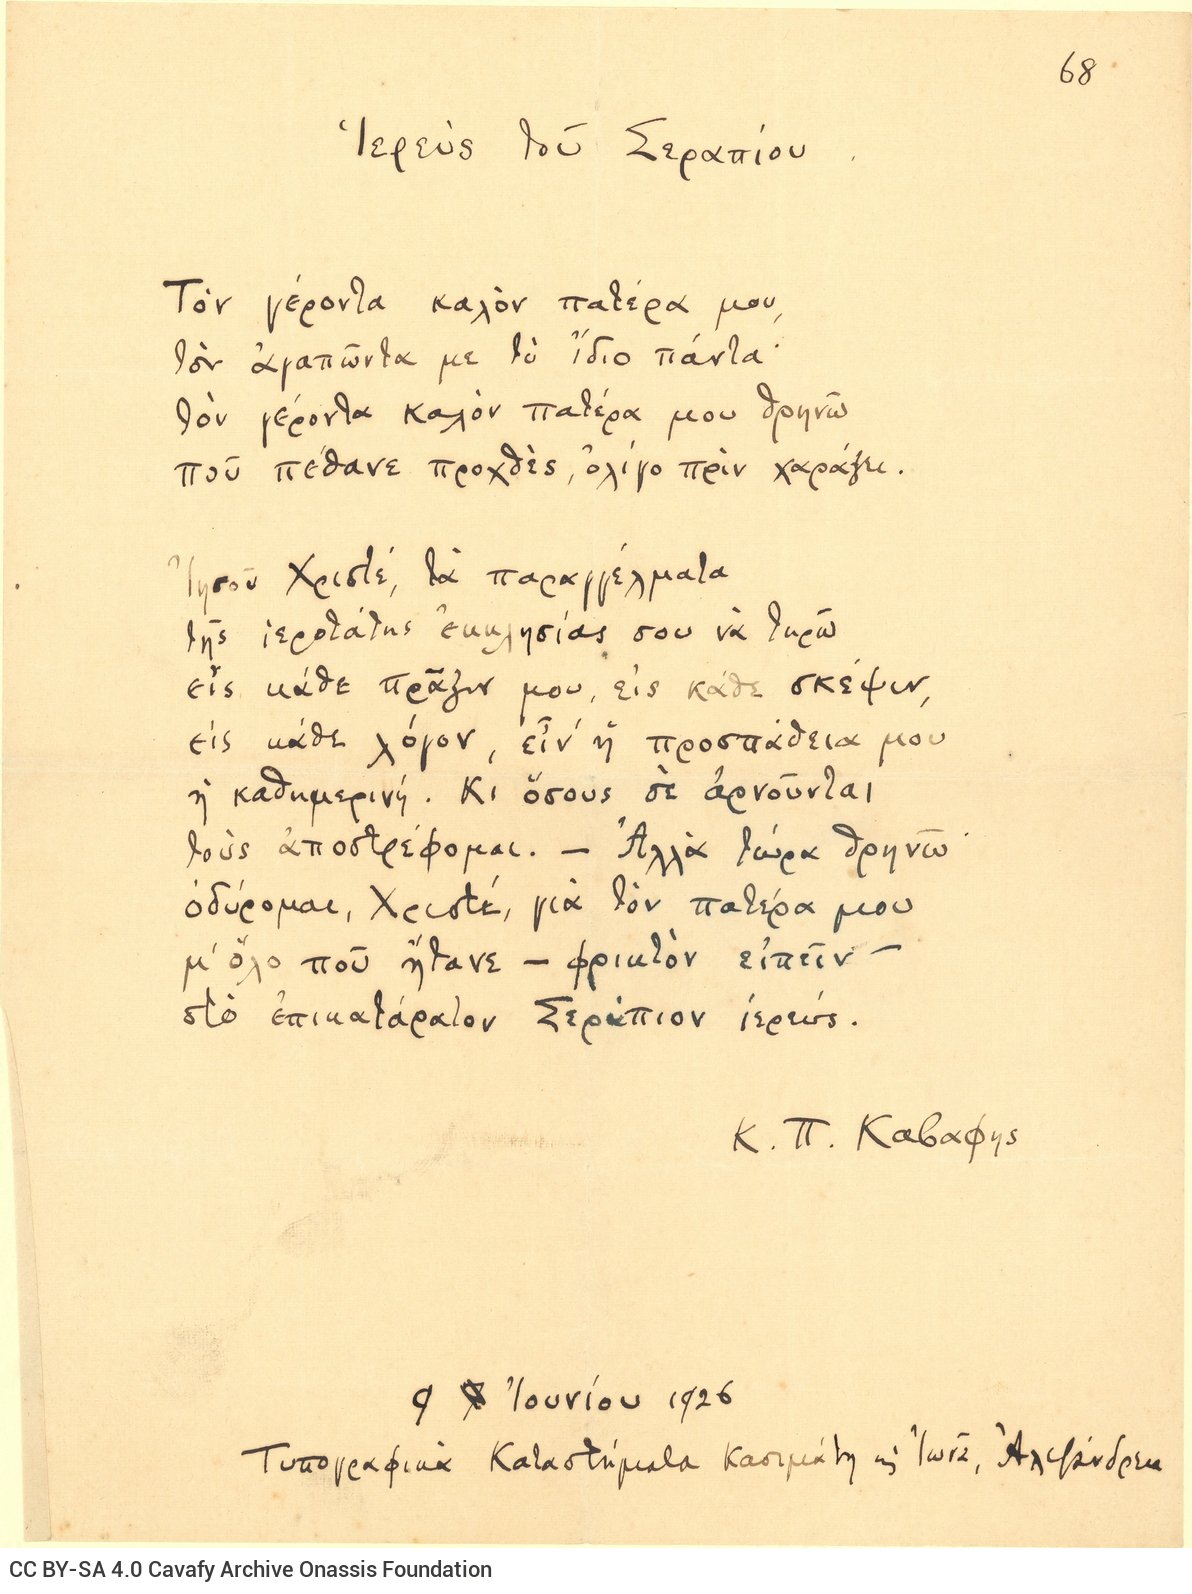 Autograph manuscript of the poem "Priest of the Serapeum" on one side of a sheet. At the bottom of the page, handwritten d